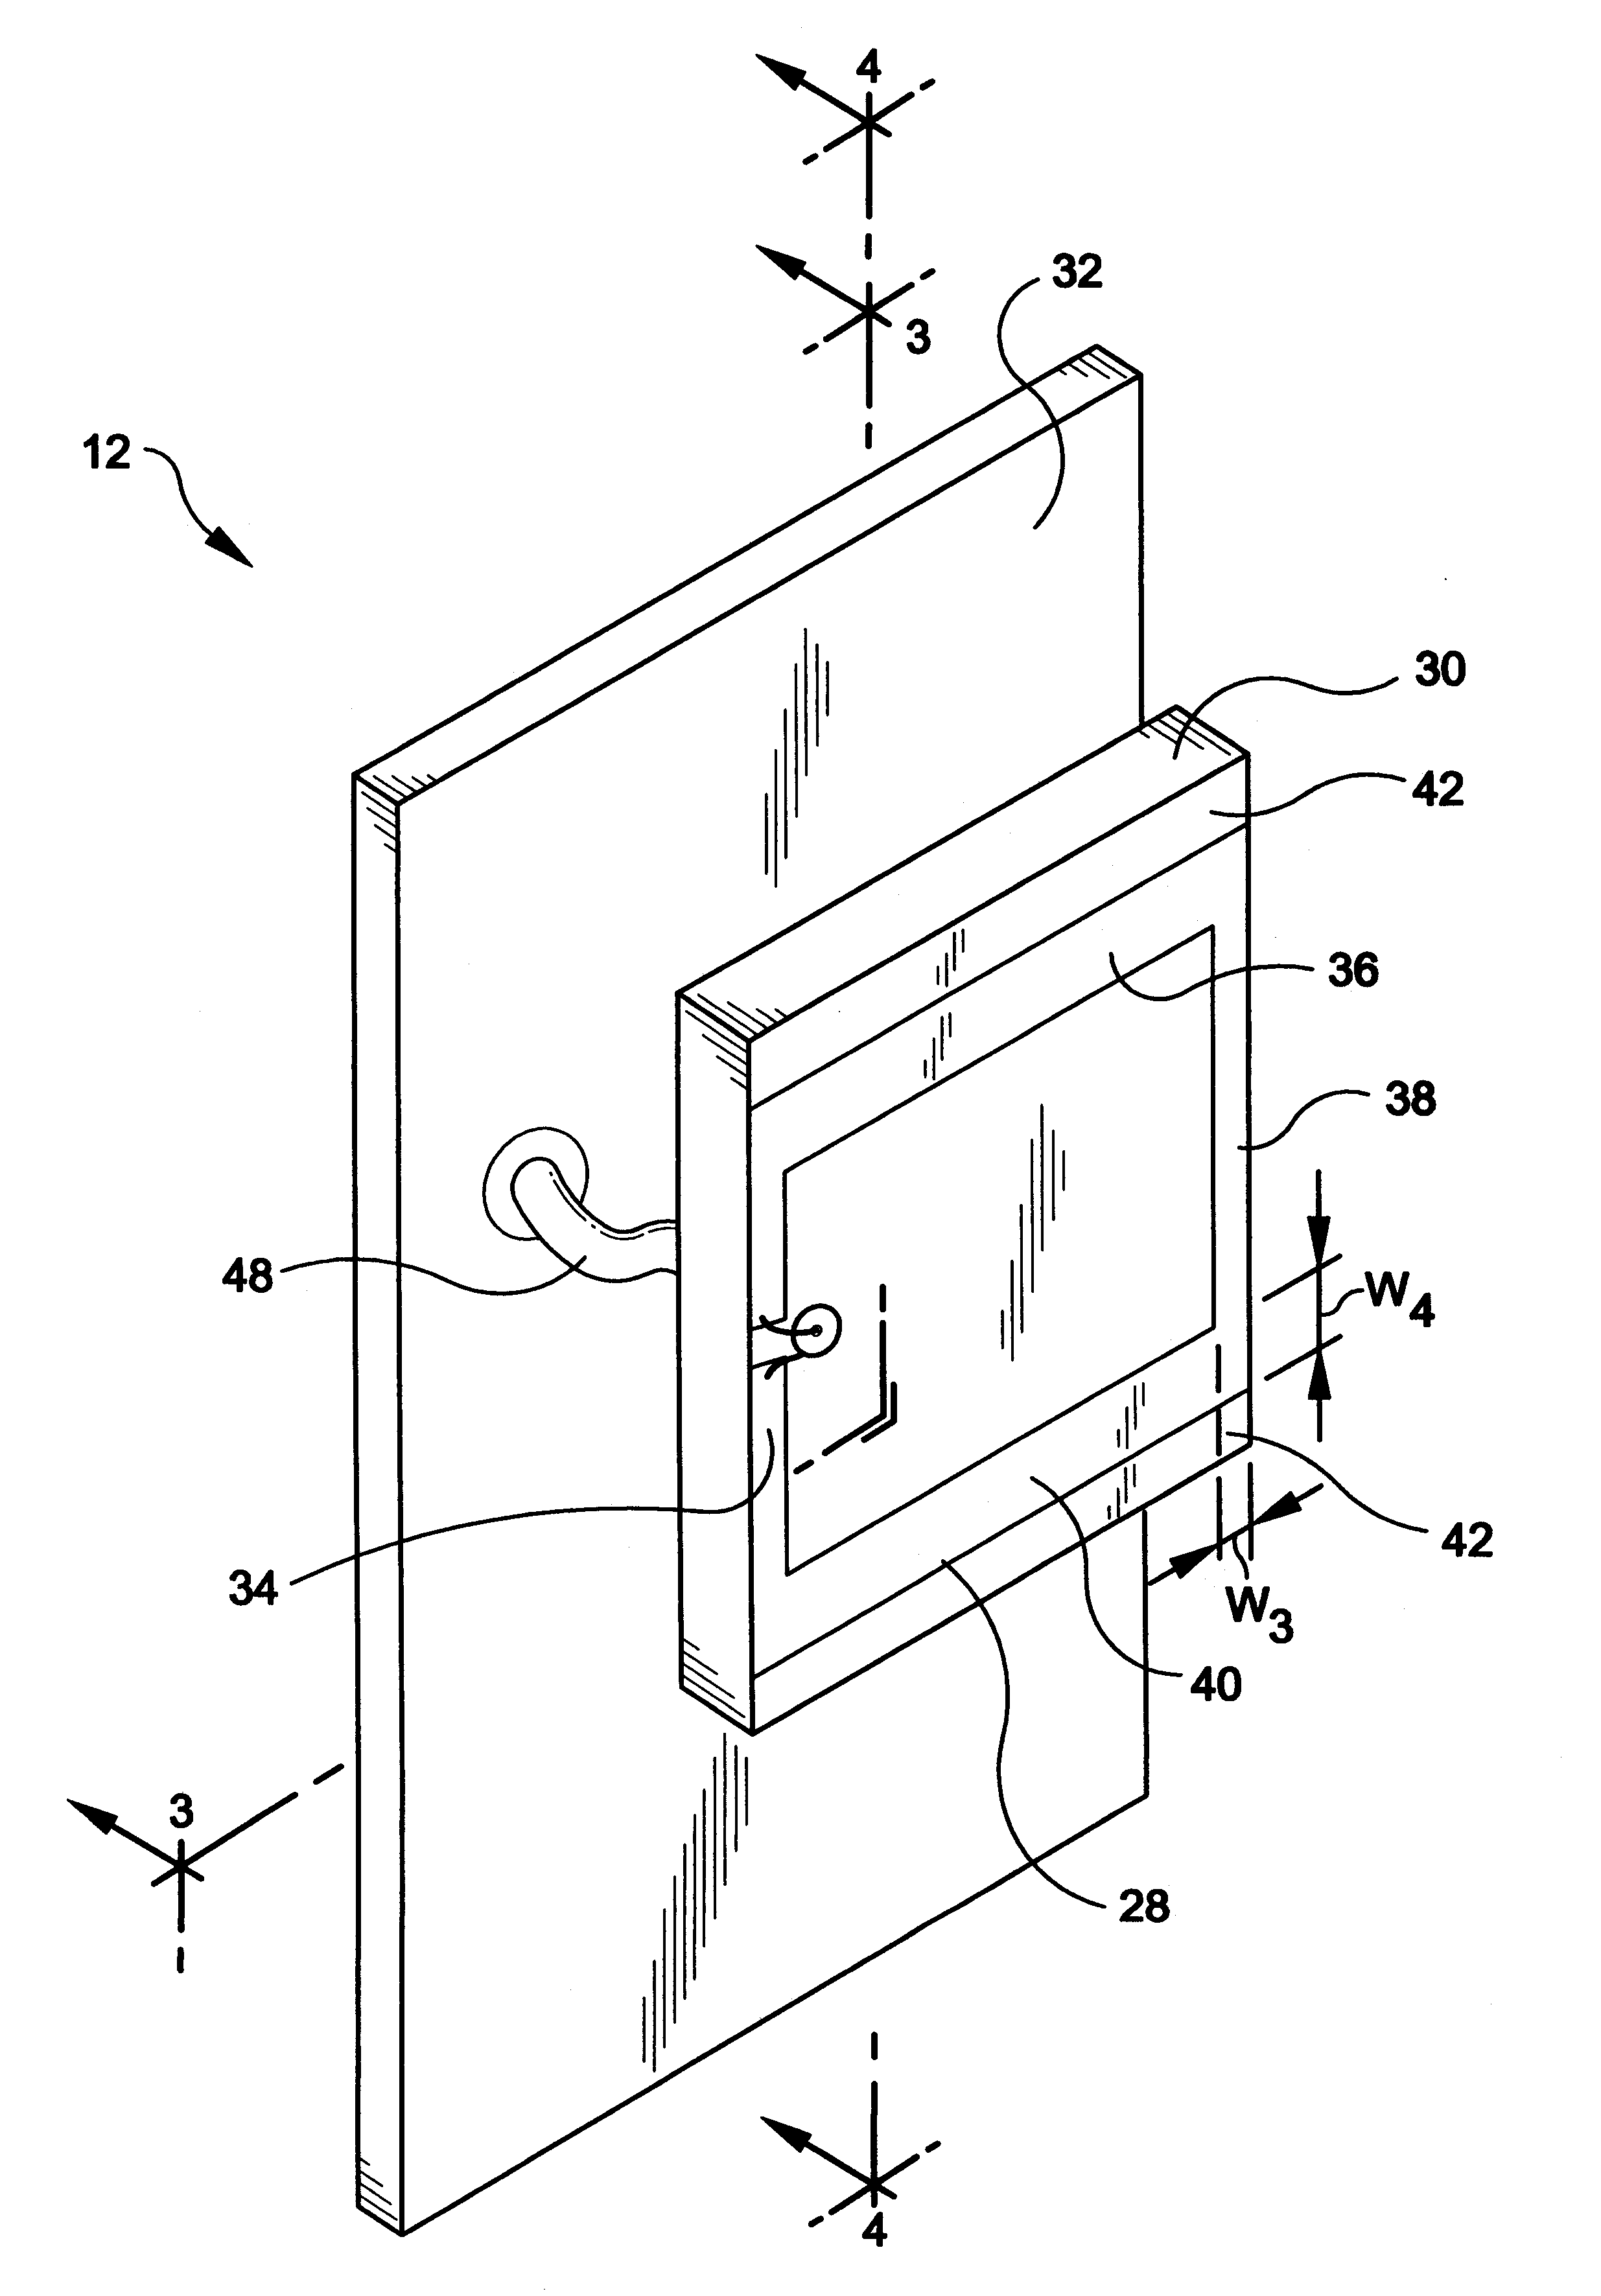 Loop antenna assembly for telecommunication devices